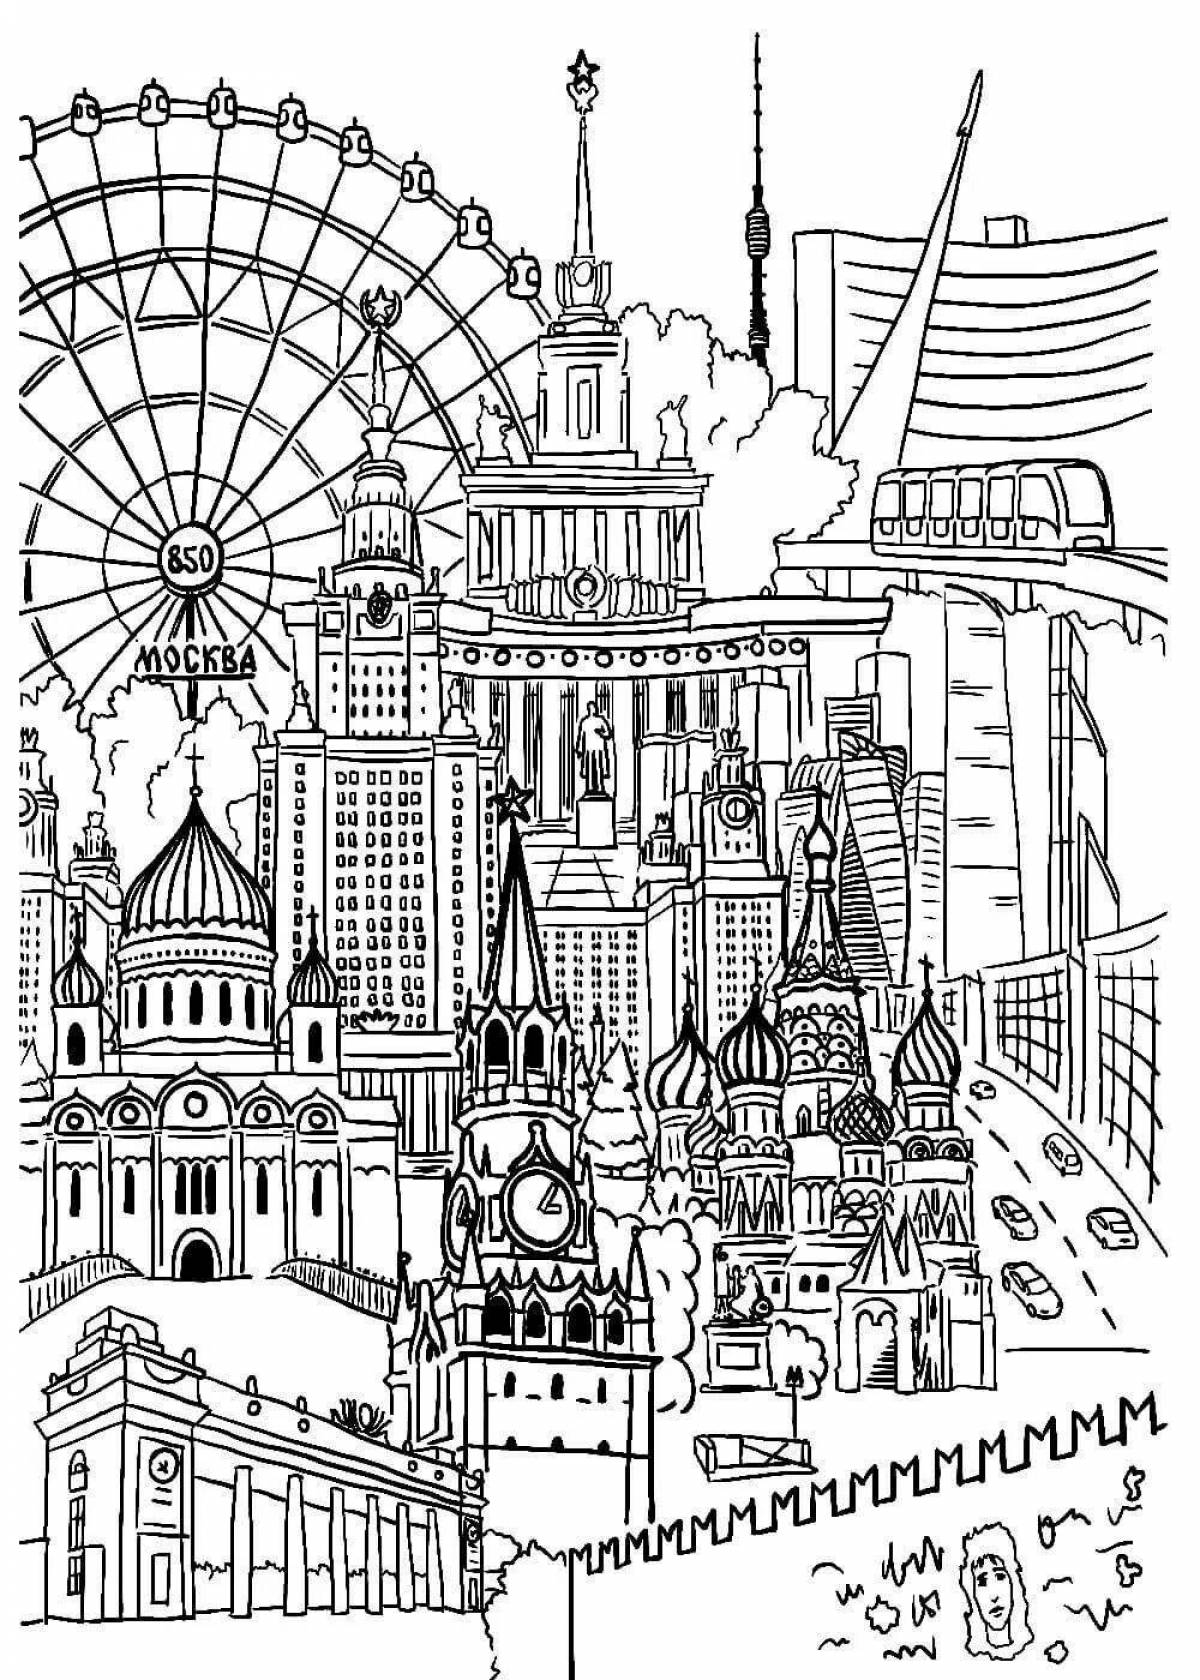 Exquisite moscow city coloring book